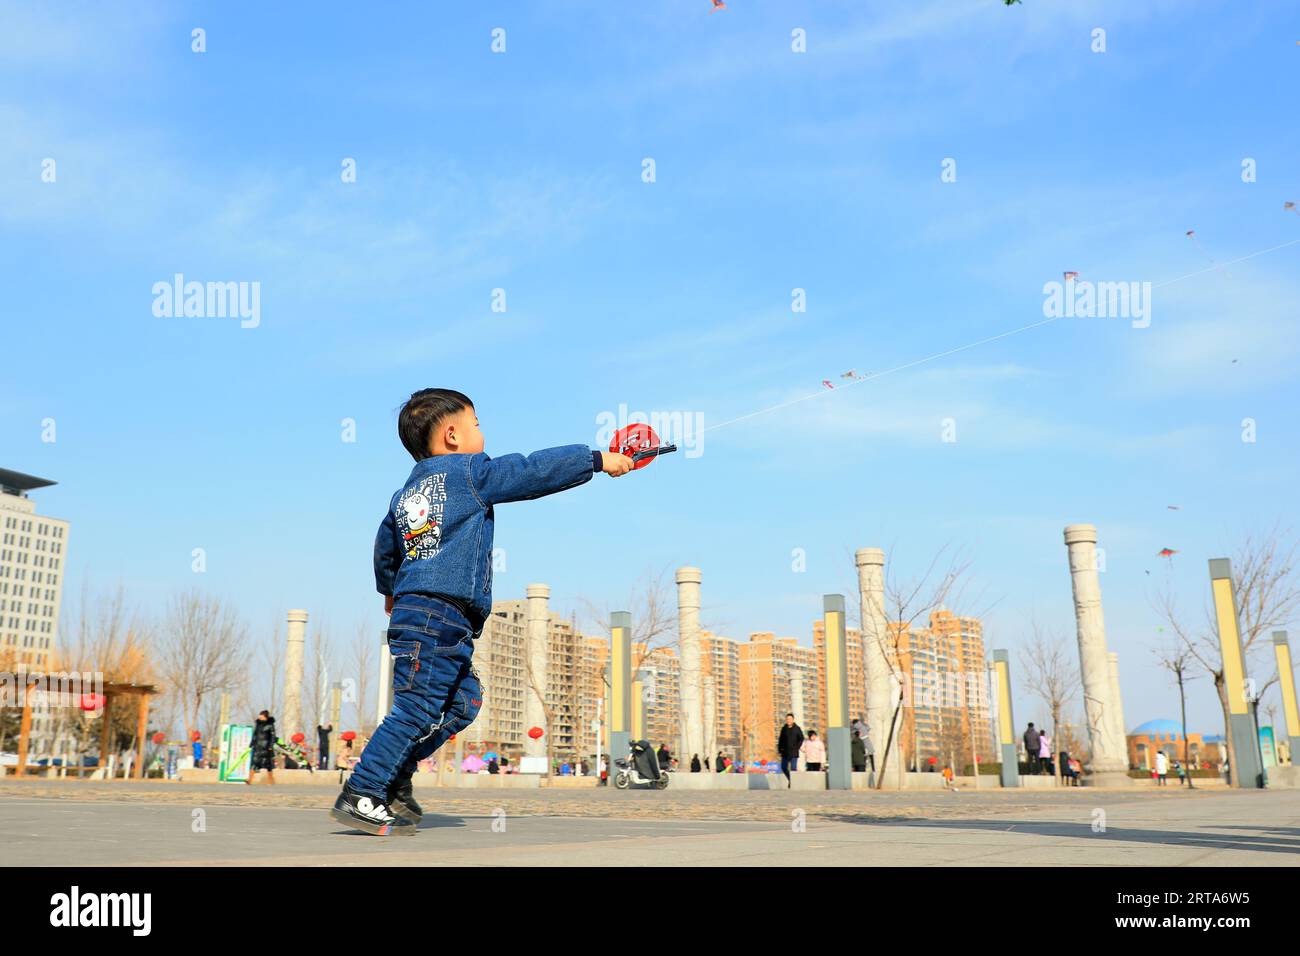 Luannan county - February 22, 2018: people fly kites in the square, luannan county, hebei province, China. Stock Photo